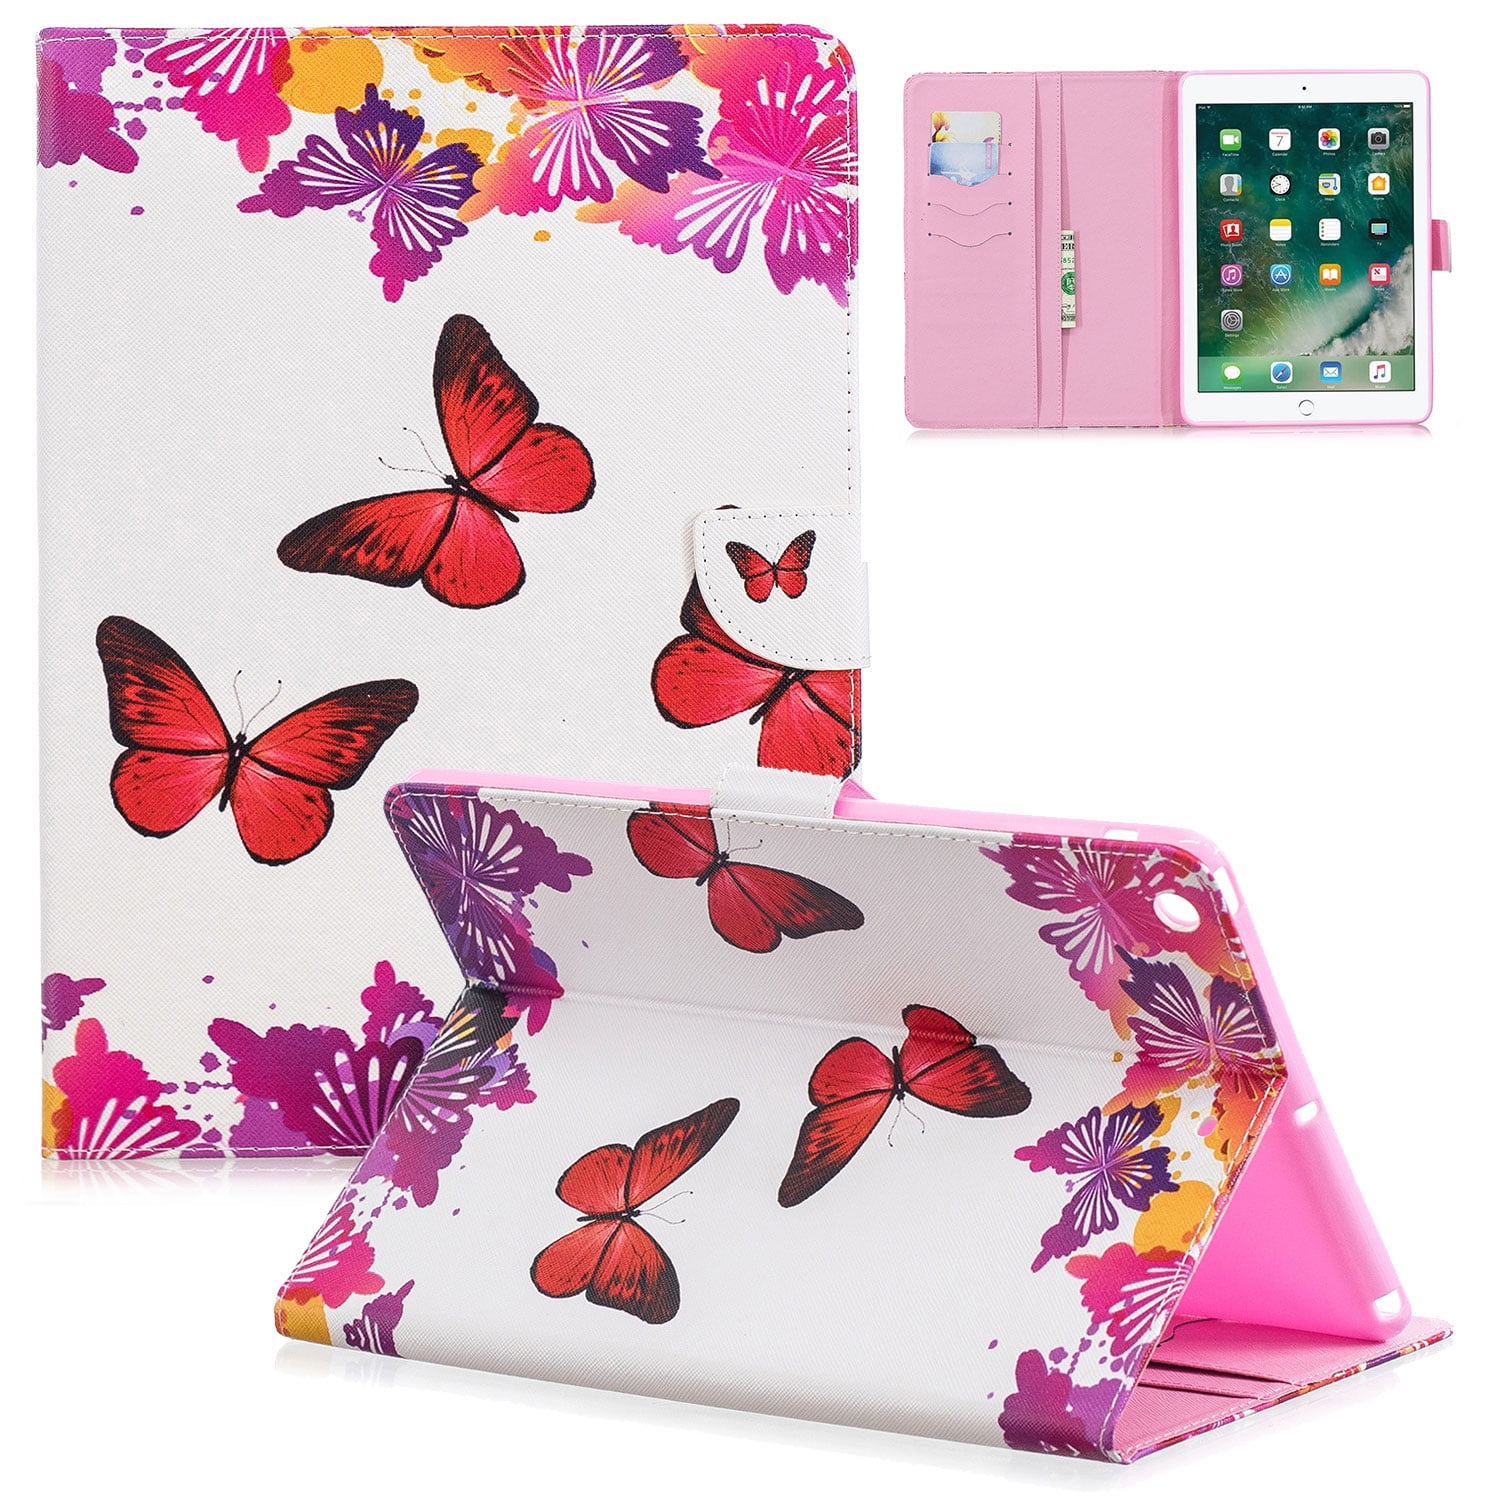 Herzzer Wallet Flip Case for iPad 10.2 2019/2020,Premium Multi-Angle View Stand Magnetic PU Leather Soft Silicone Cover for Women Girls,Blue Butterfly 